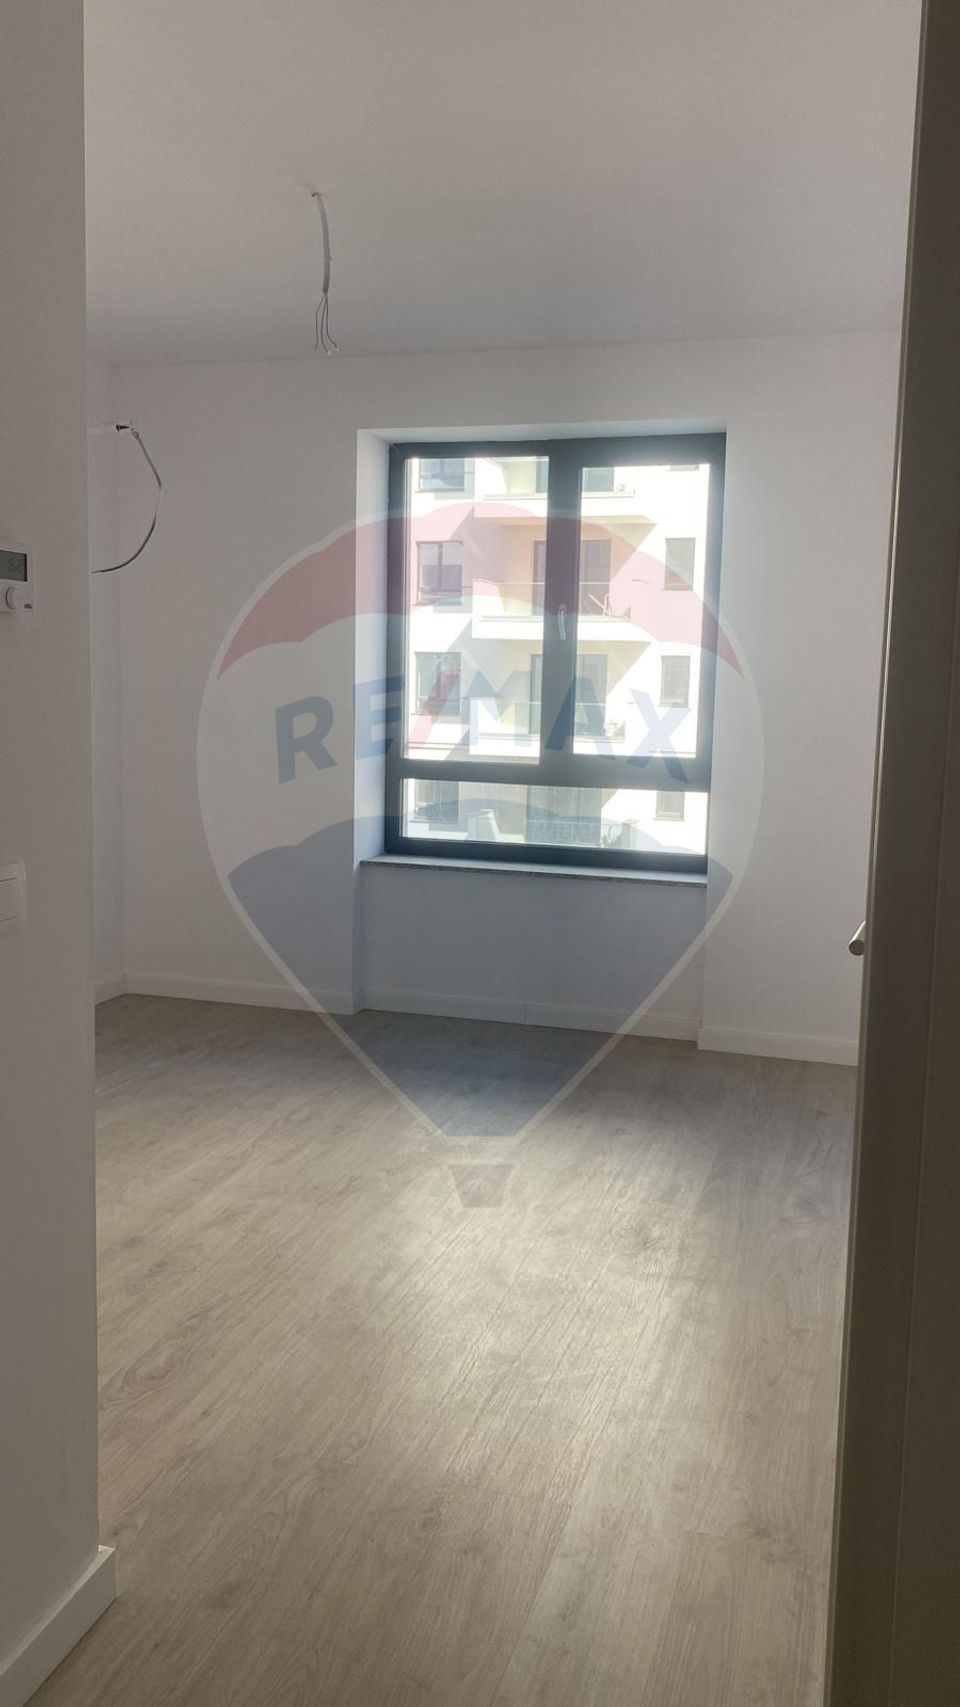 For sale two-room apartment in Baneasa area